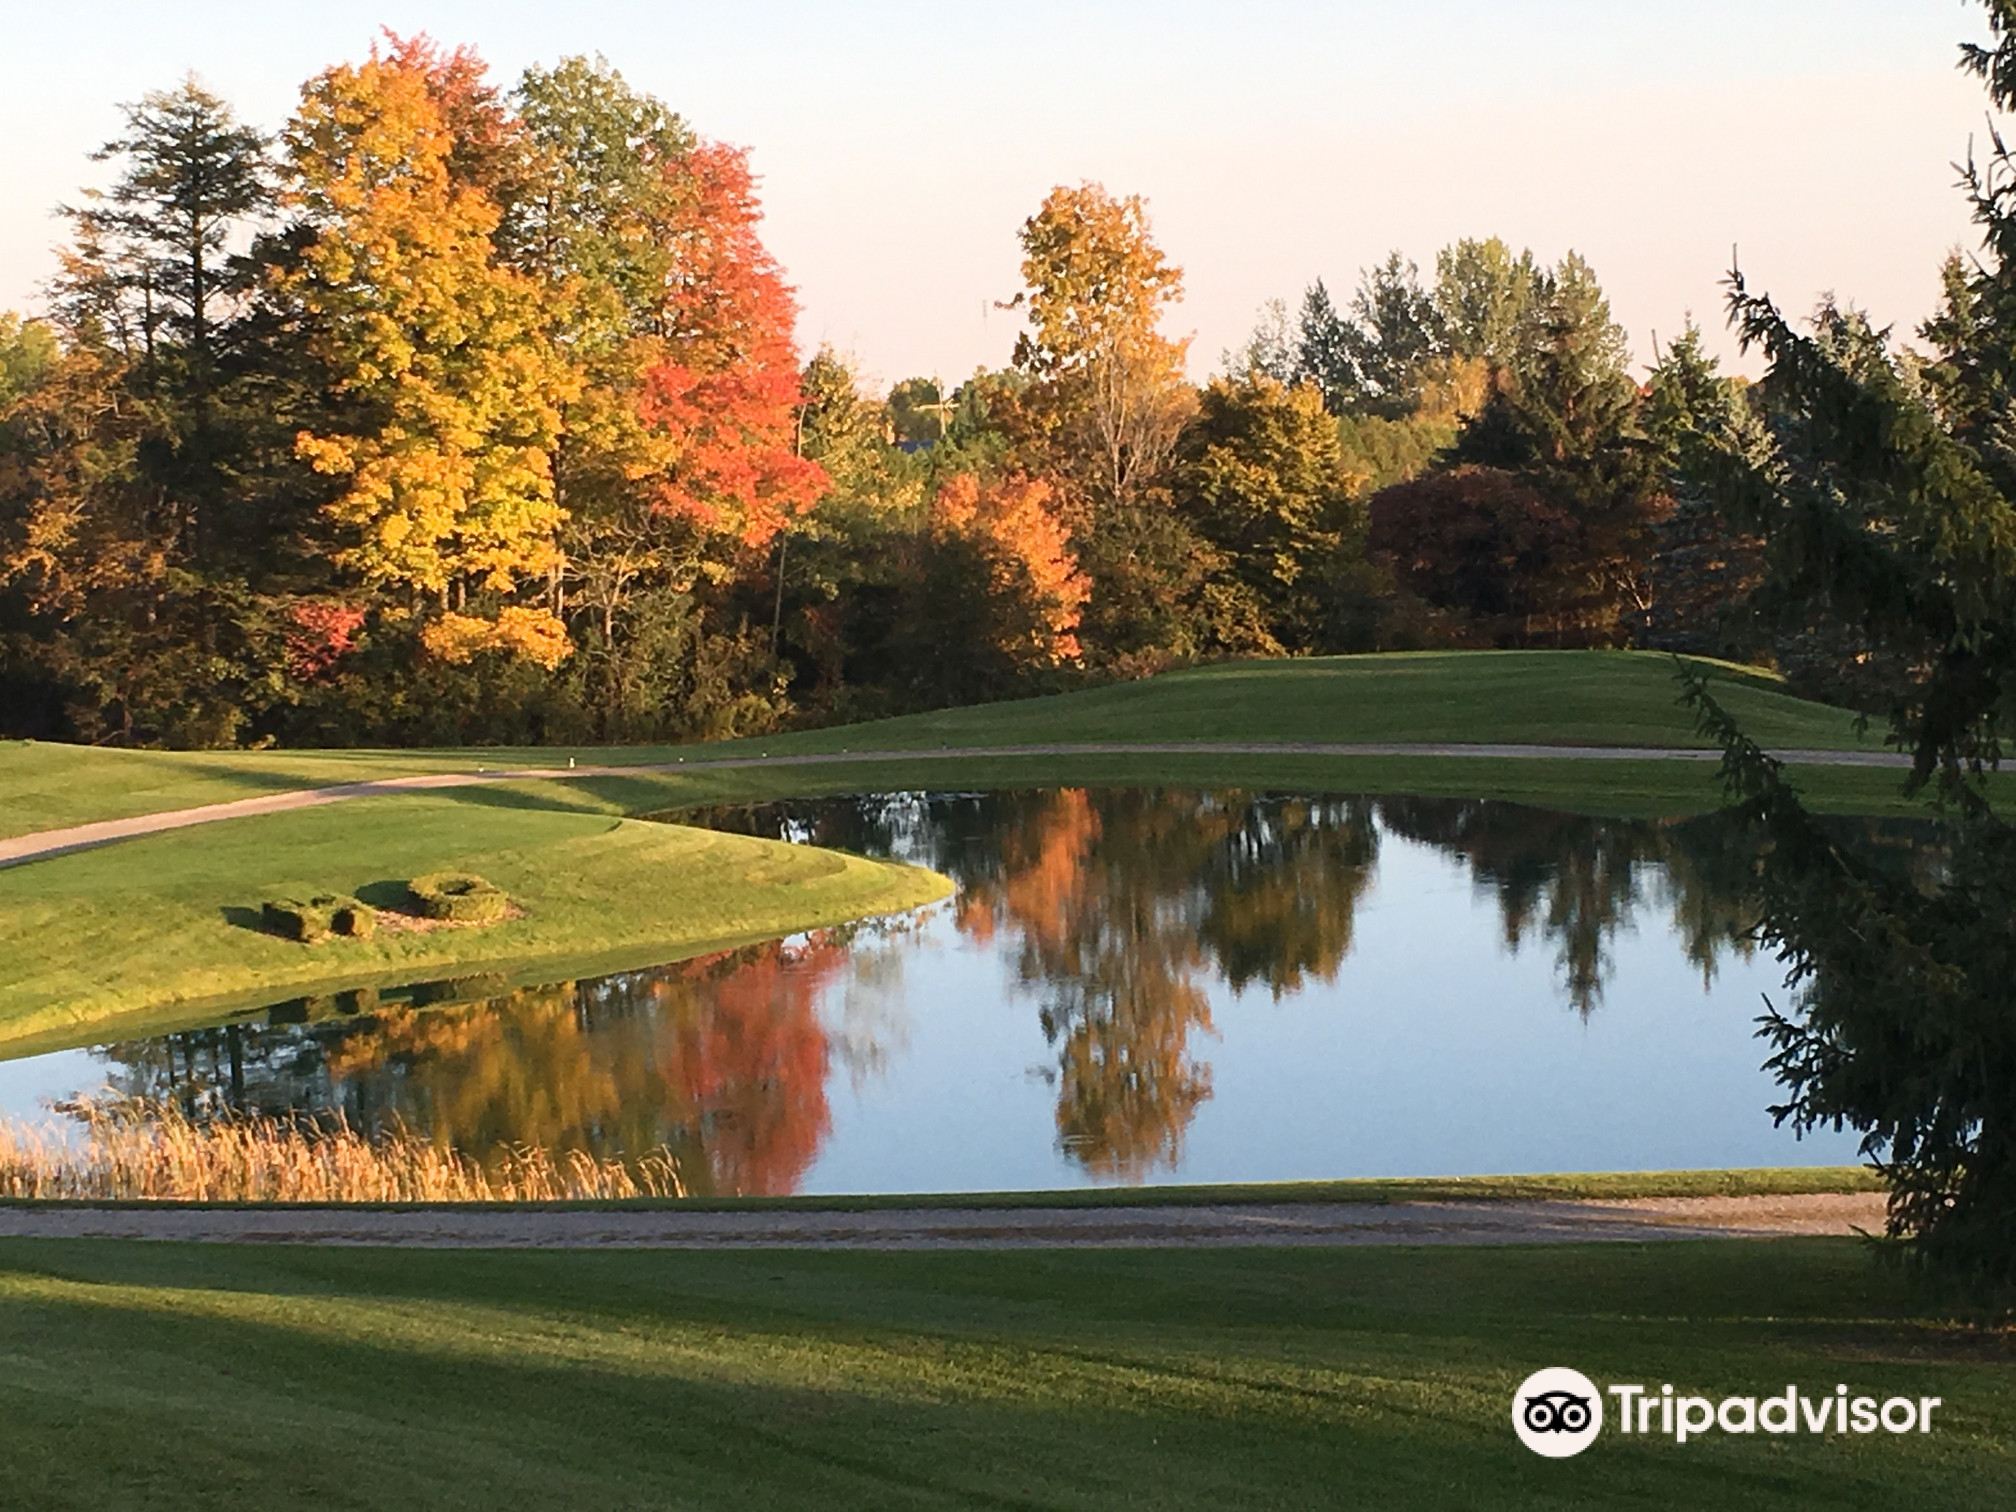 Heather Glen Golf Club attraction reviews - Heather Glen Golf Club tickets  - Heather Glen Golf Club discounts - Heather Glen Golf Club transportation,  address, opening hours - attractions, hotels, and food